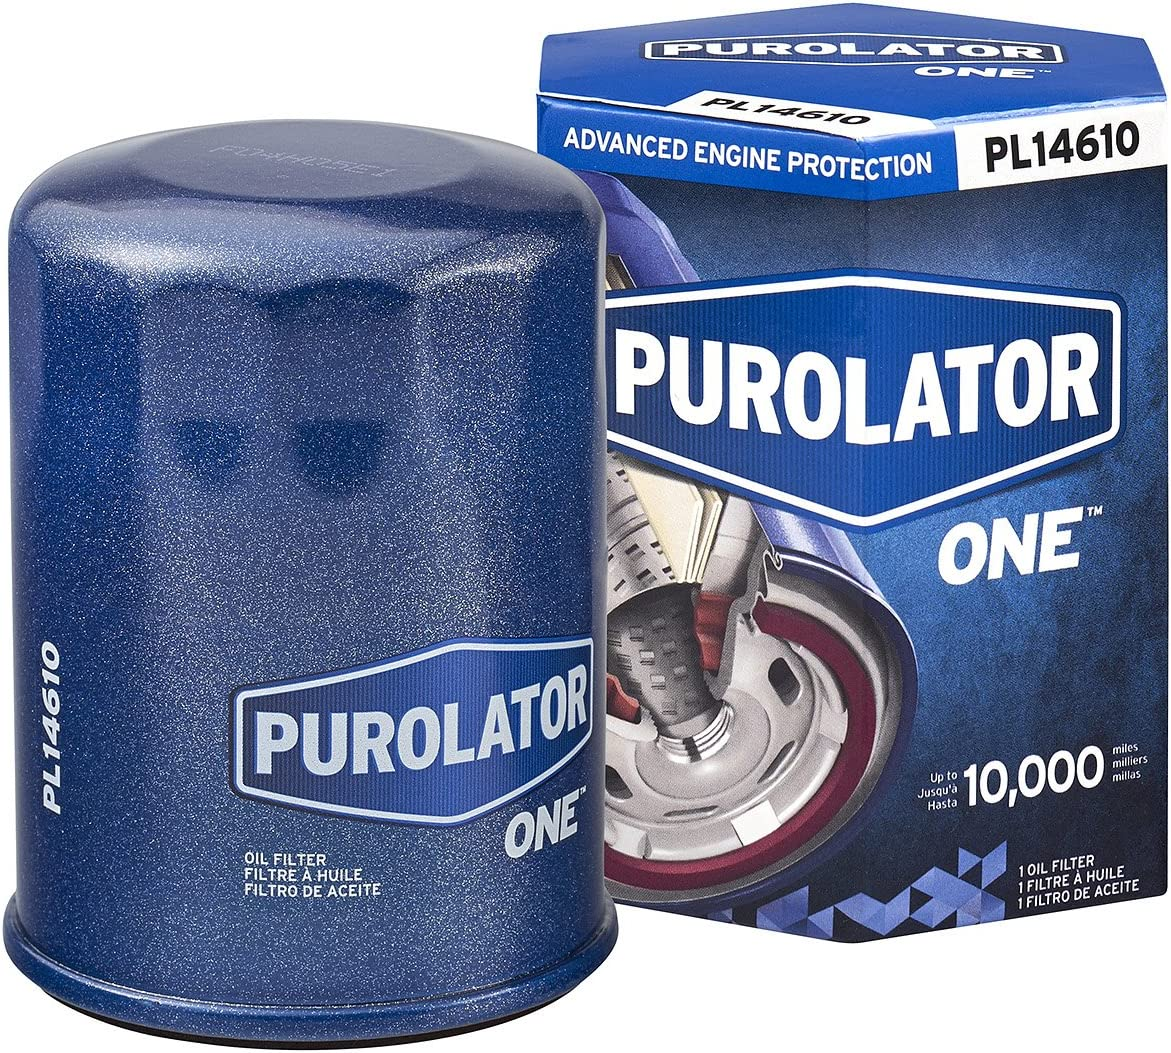 Amazon.com: PurolatorONE oil filter 12 pack ‎PL14610 $25.30 some Honda and other makes